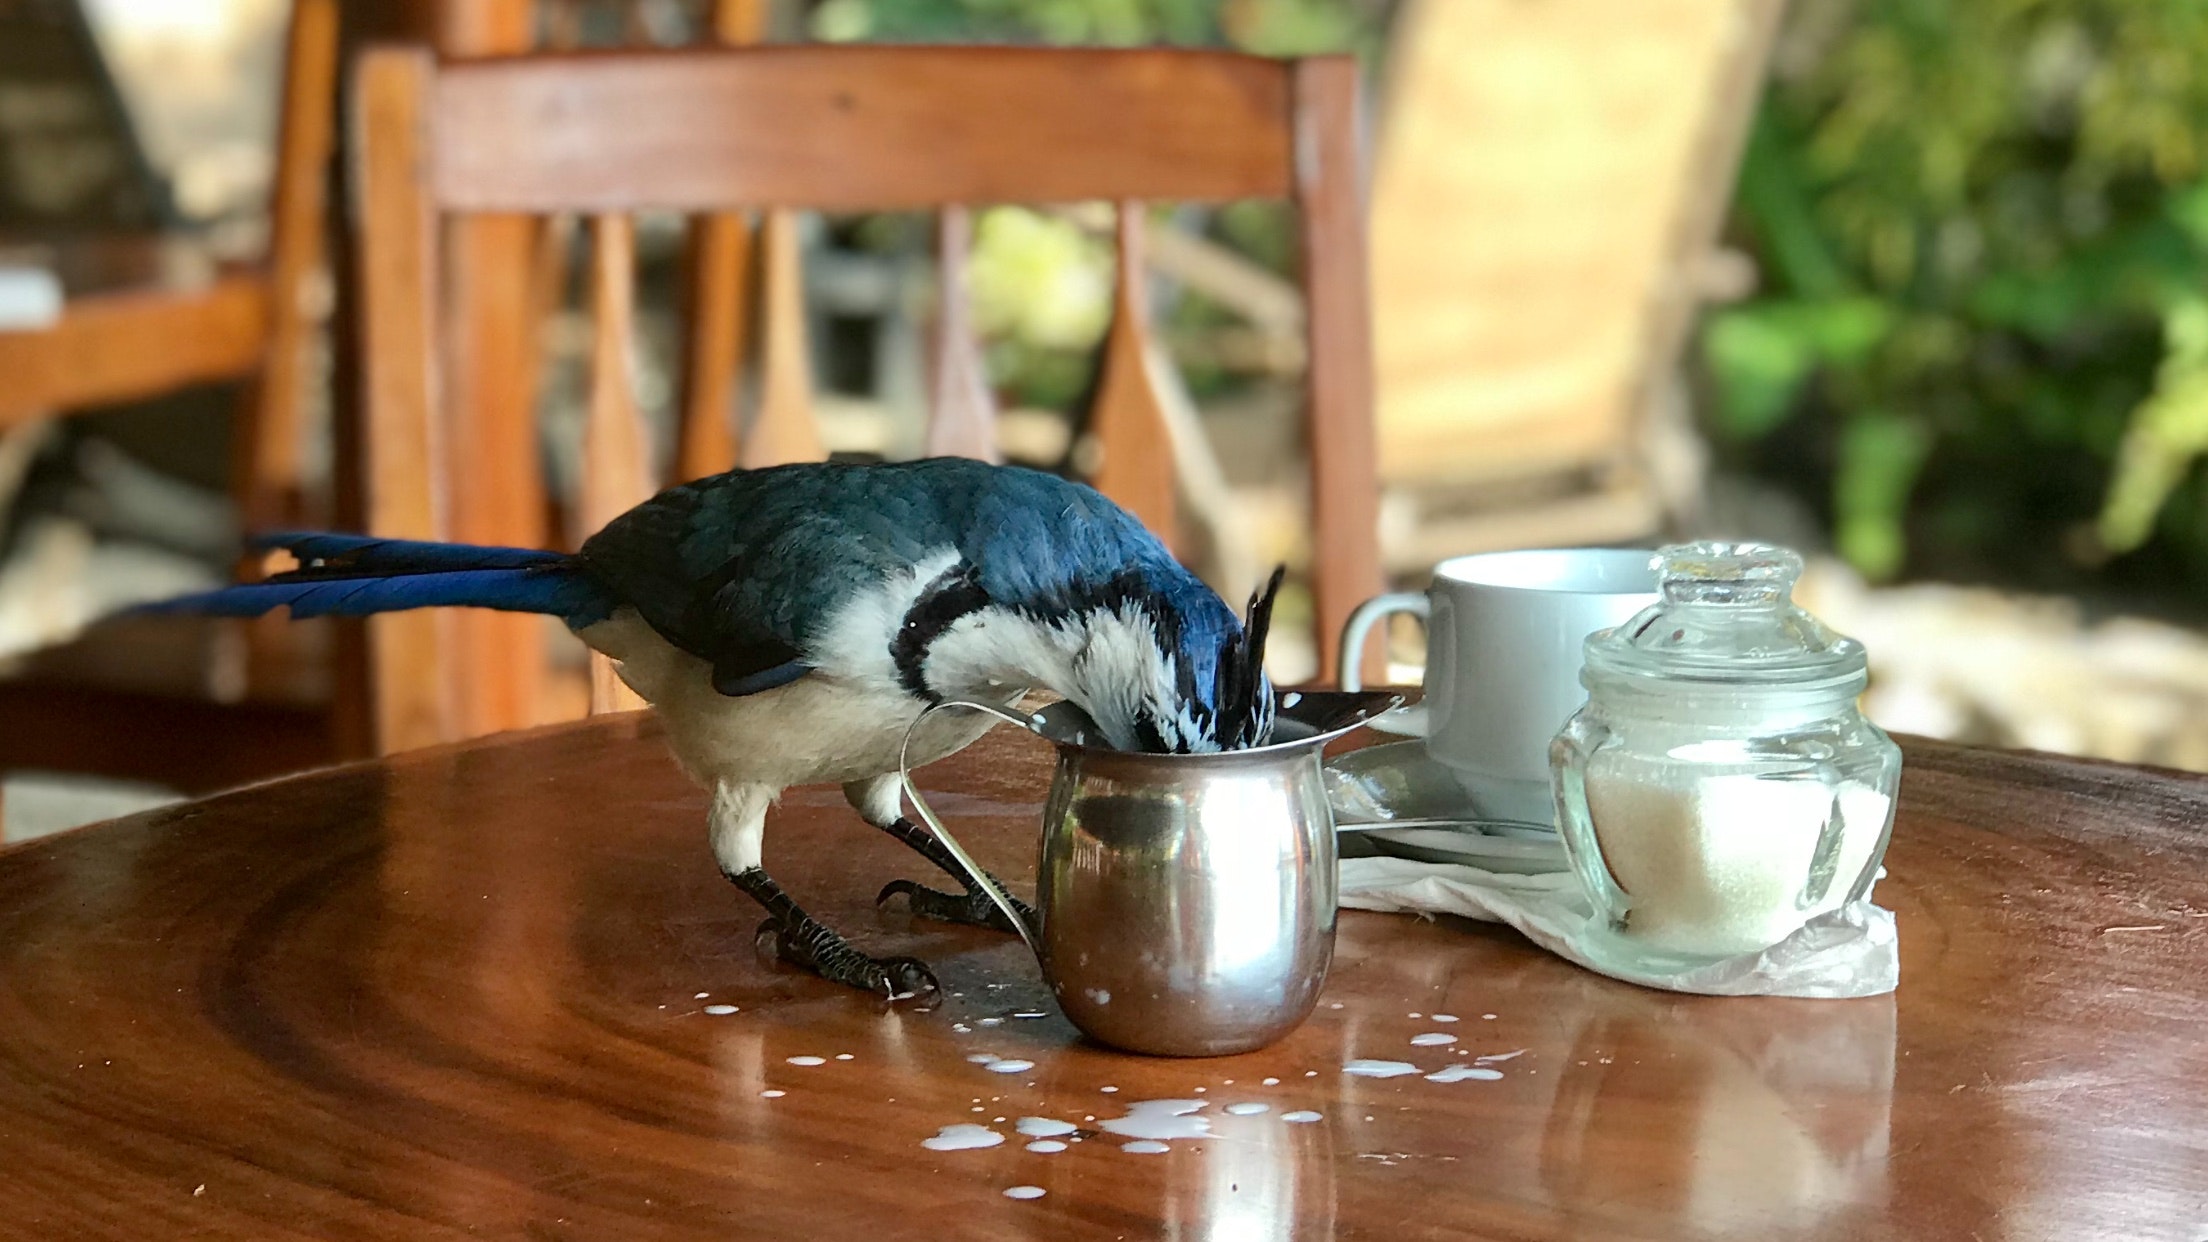 bird-beside-container-on-the-table-1058939.jpg